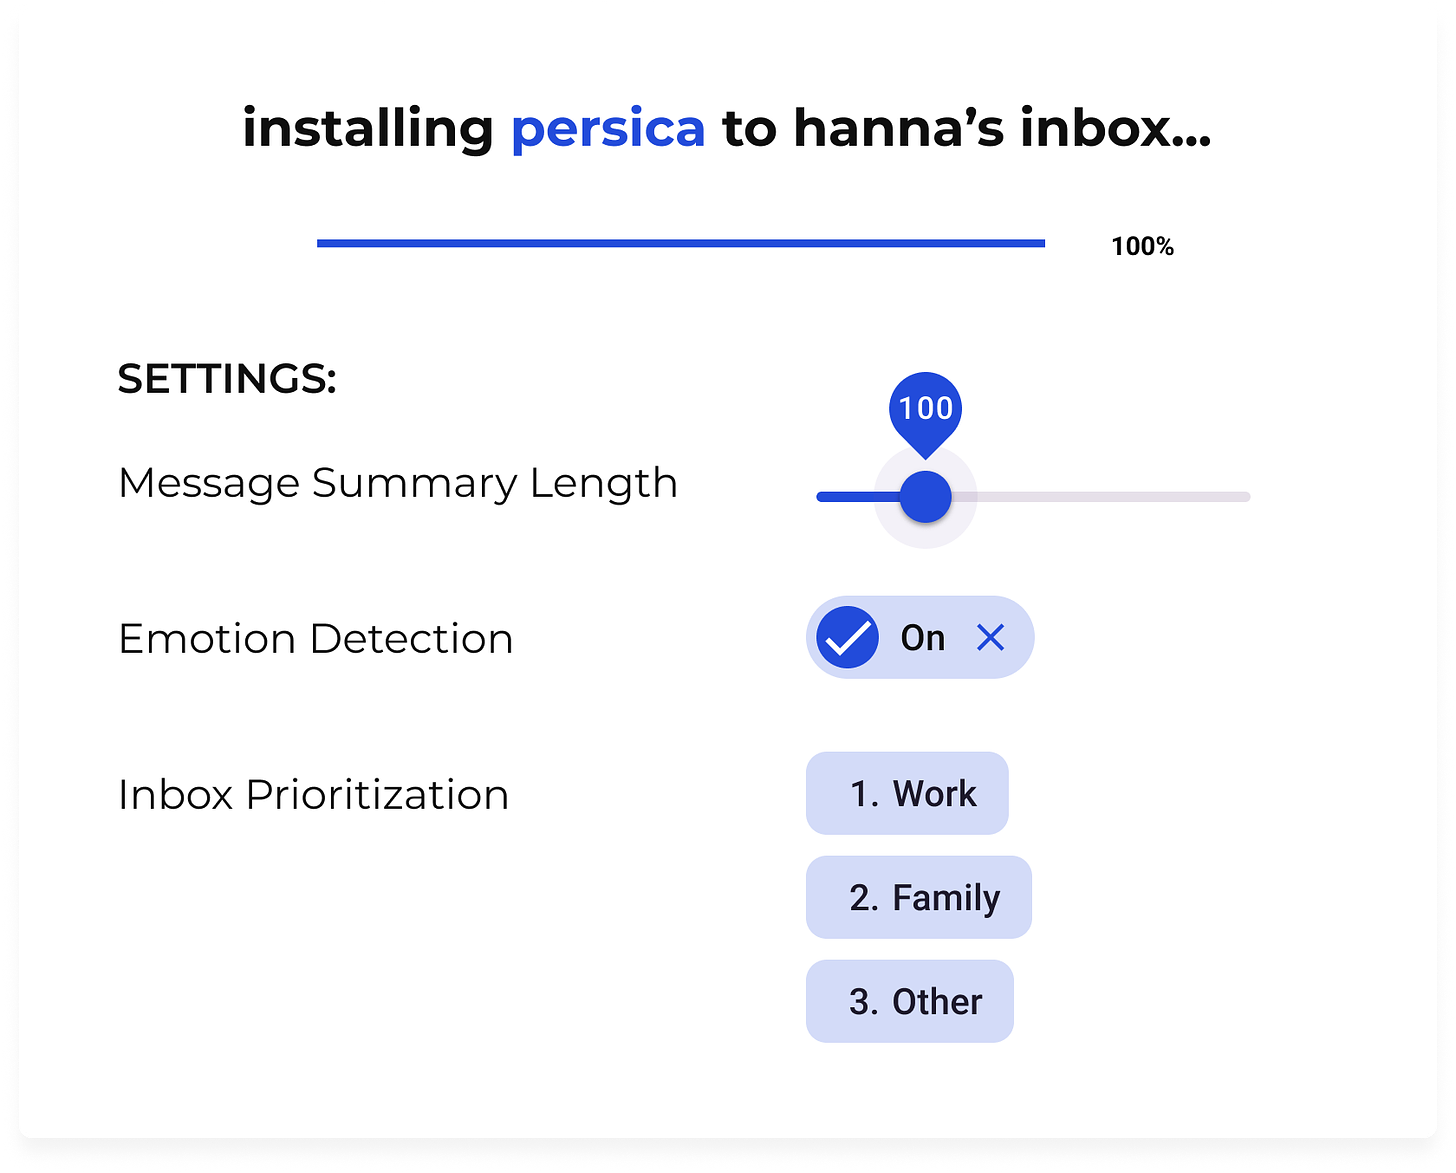 Screenshot showing Persica being installed to Hannah's inbox. Persica settings panel has three custom settings. Message summary length is set to 100 words. Emotion detection is turned on. Inbox prioritization is set to 1. Work 2. Family and 3. Other. 